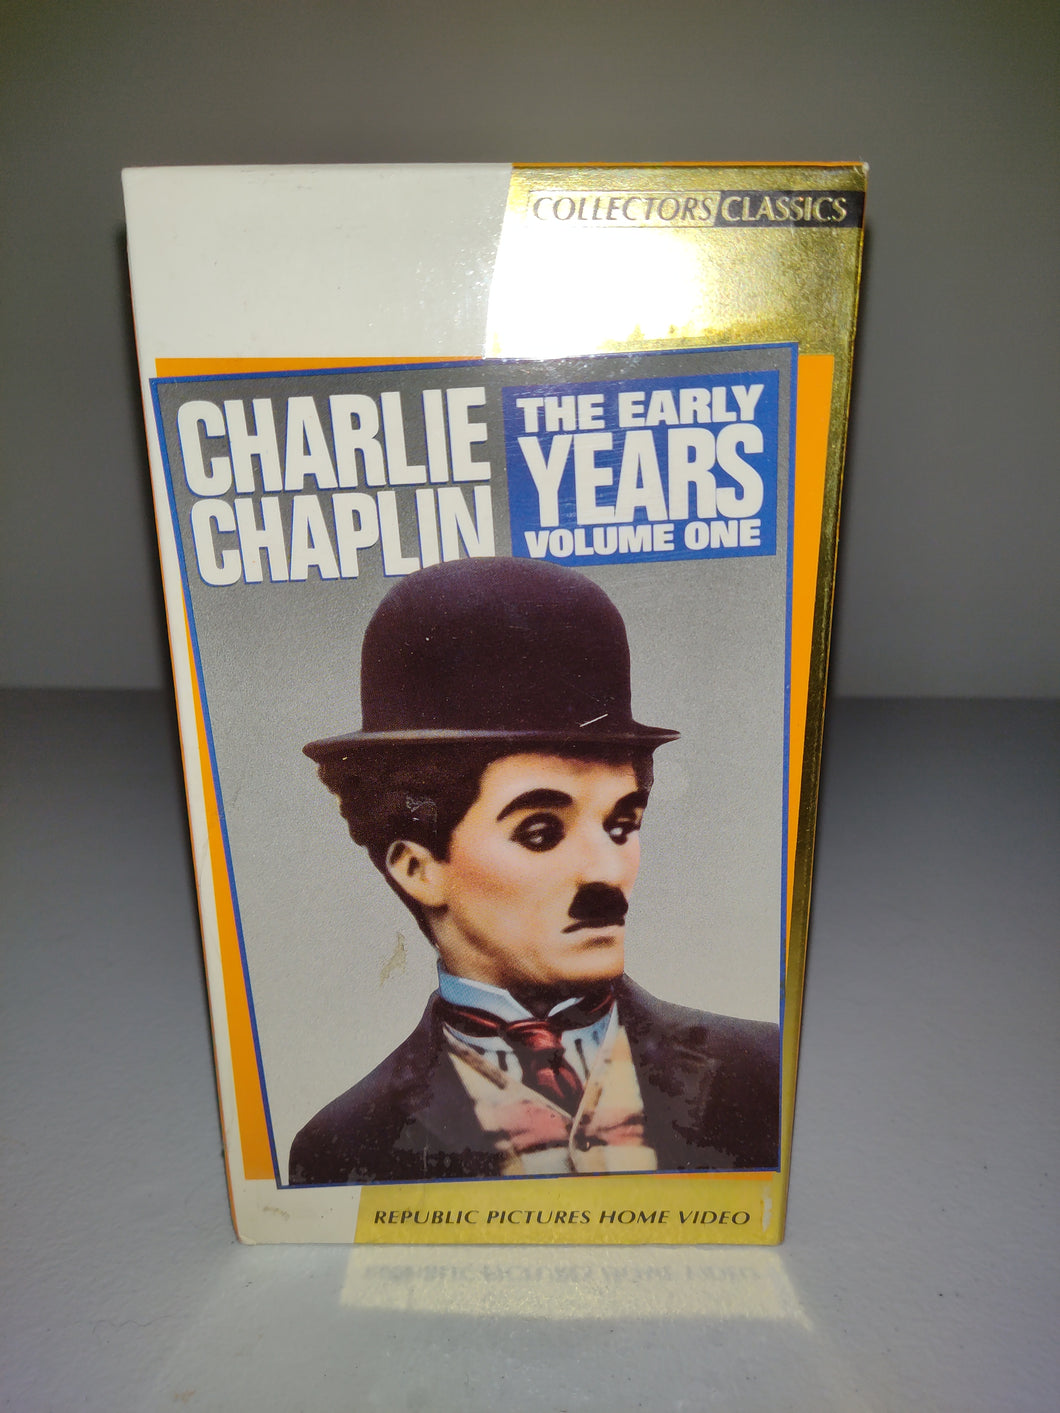 CHARLIE CHAPLIN - The Early Years: Volume Vol 1 (VHS, 1989) NEW